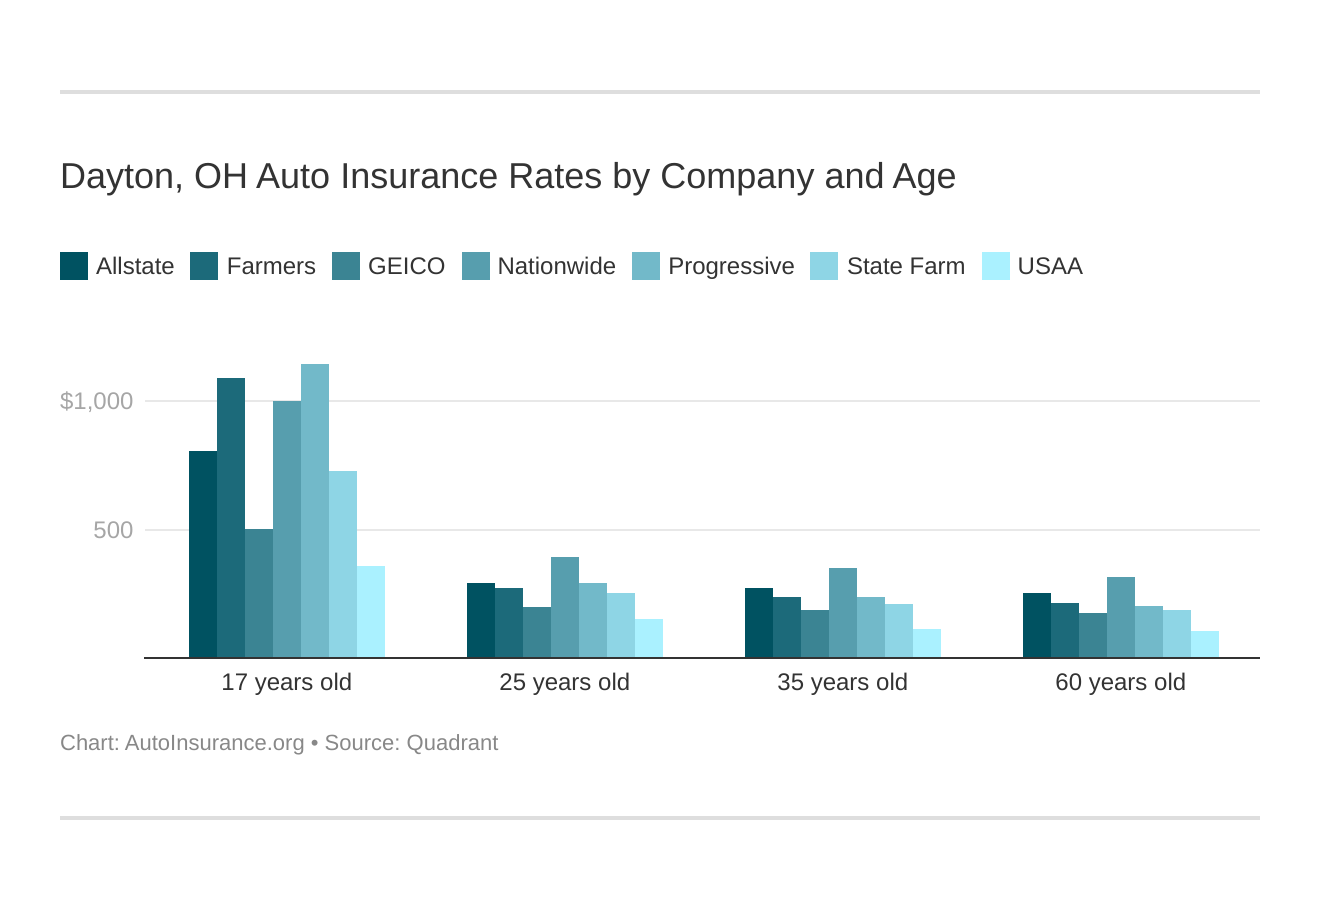 Dayton, OH Auto Insurance Rates by Company and Age